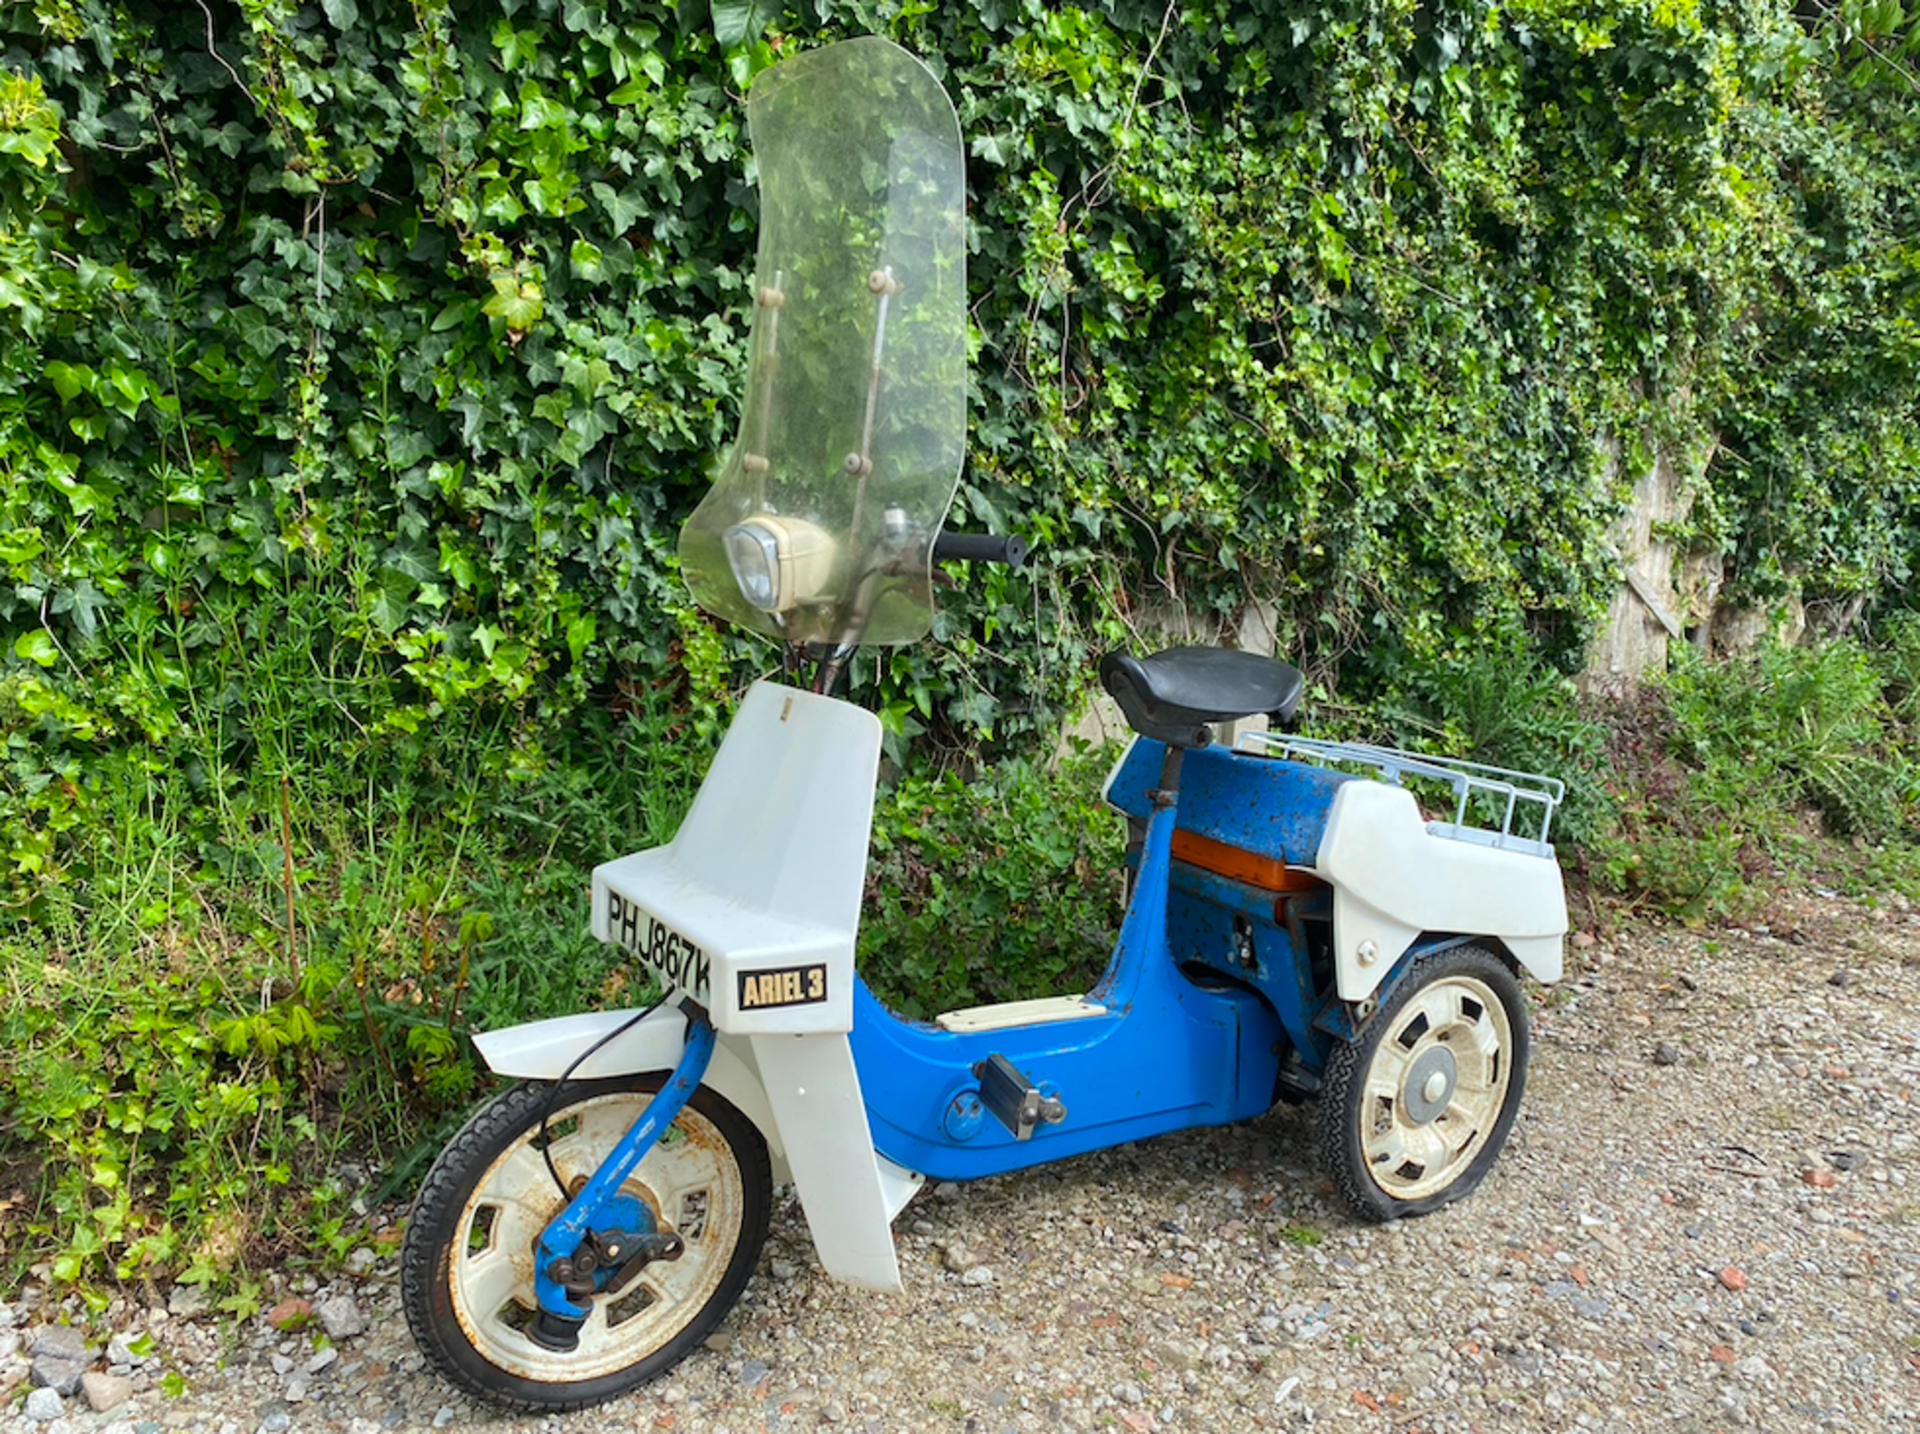 1972 BSA ARIEL 3 TRICYCLE - Image 6 of 6